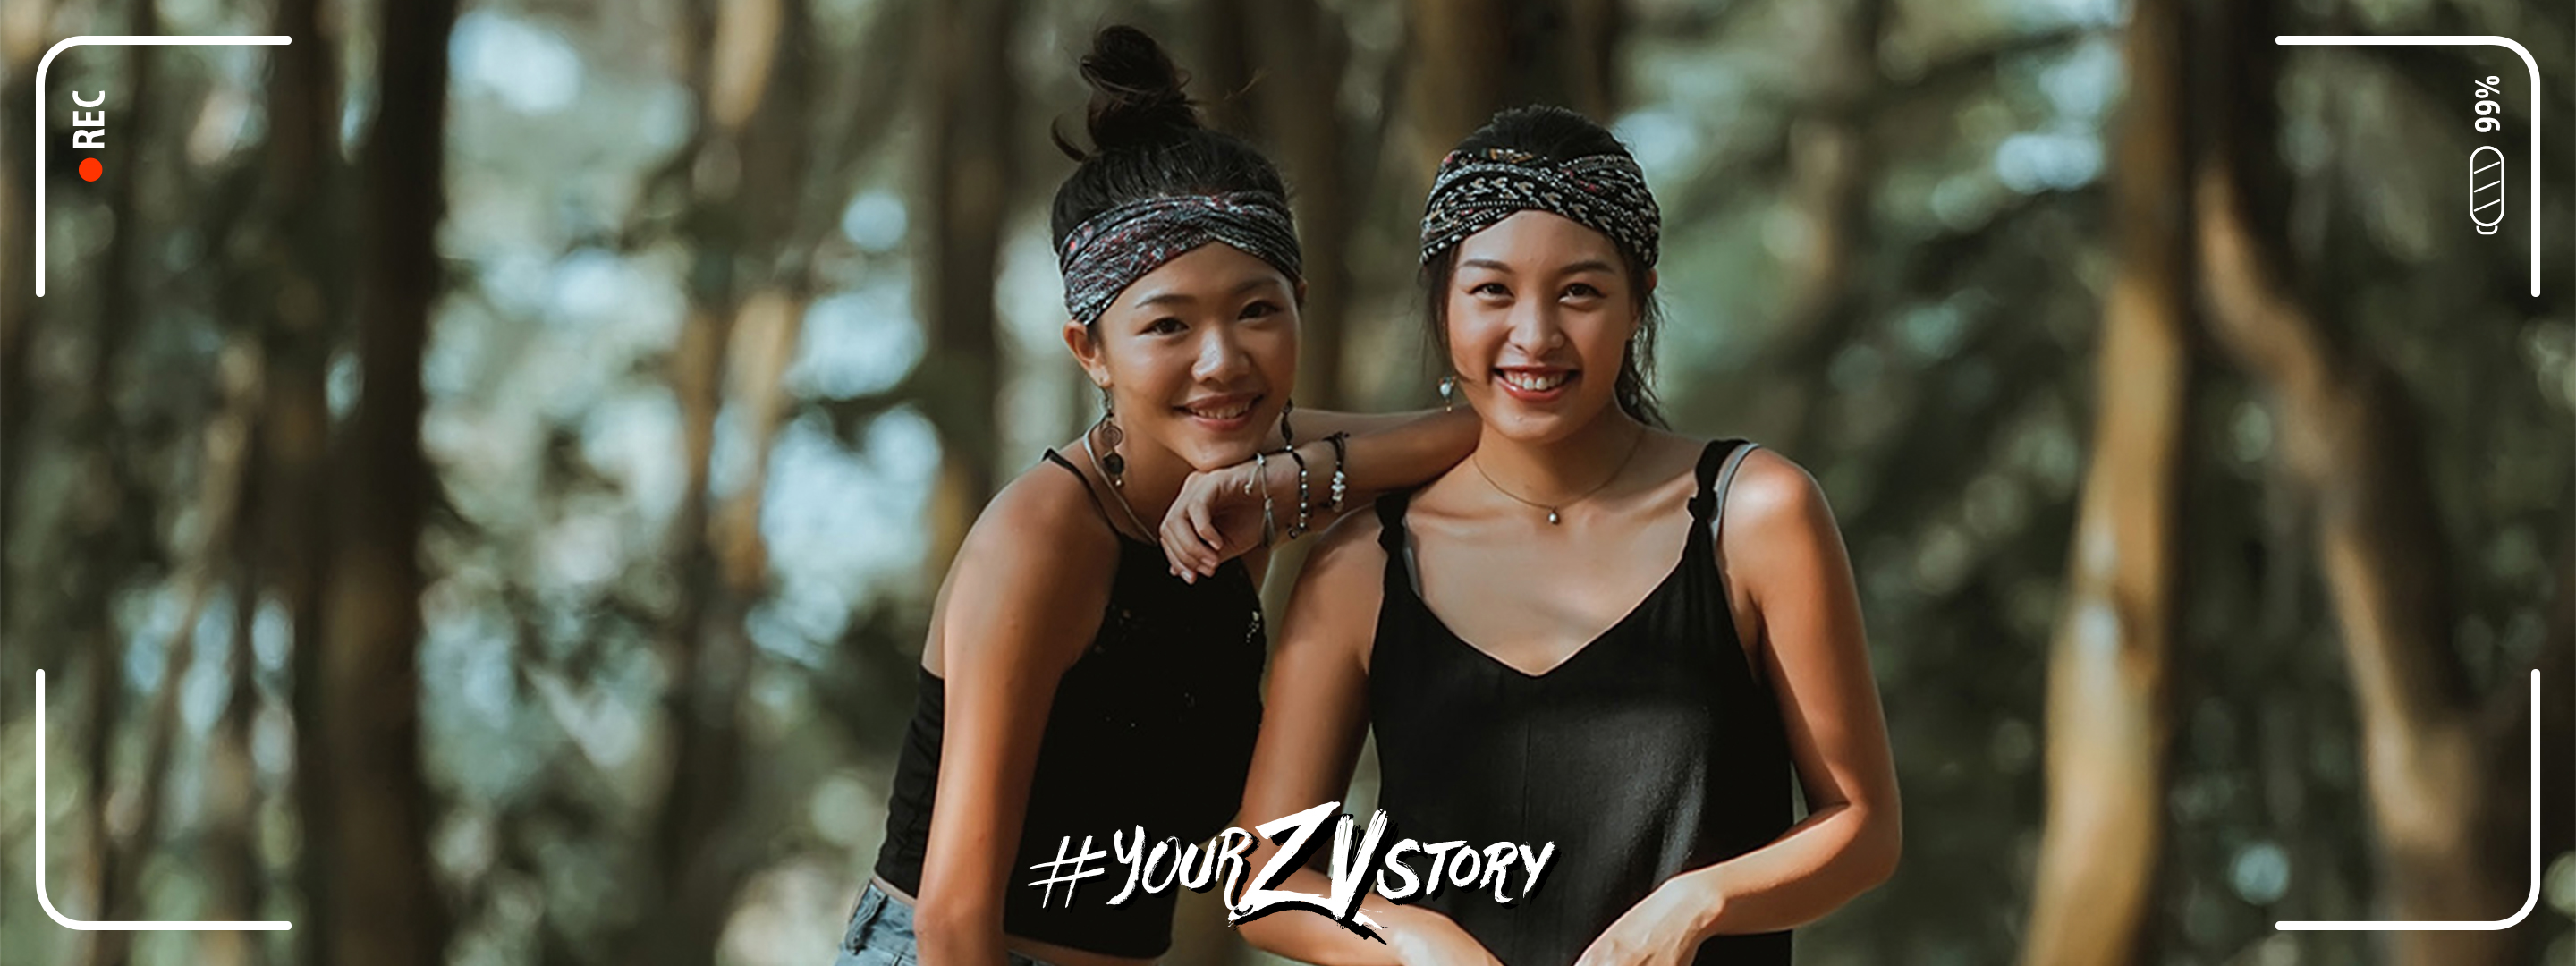 Celine and Cynthia share their unique story with YourZVStory